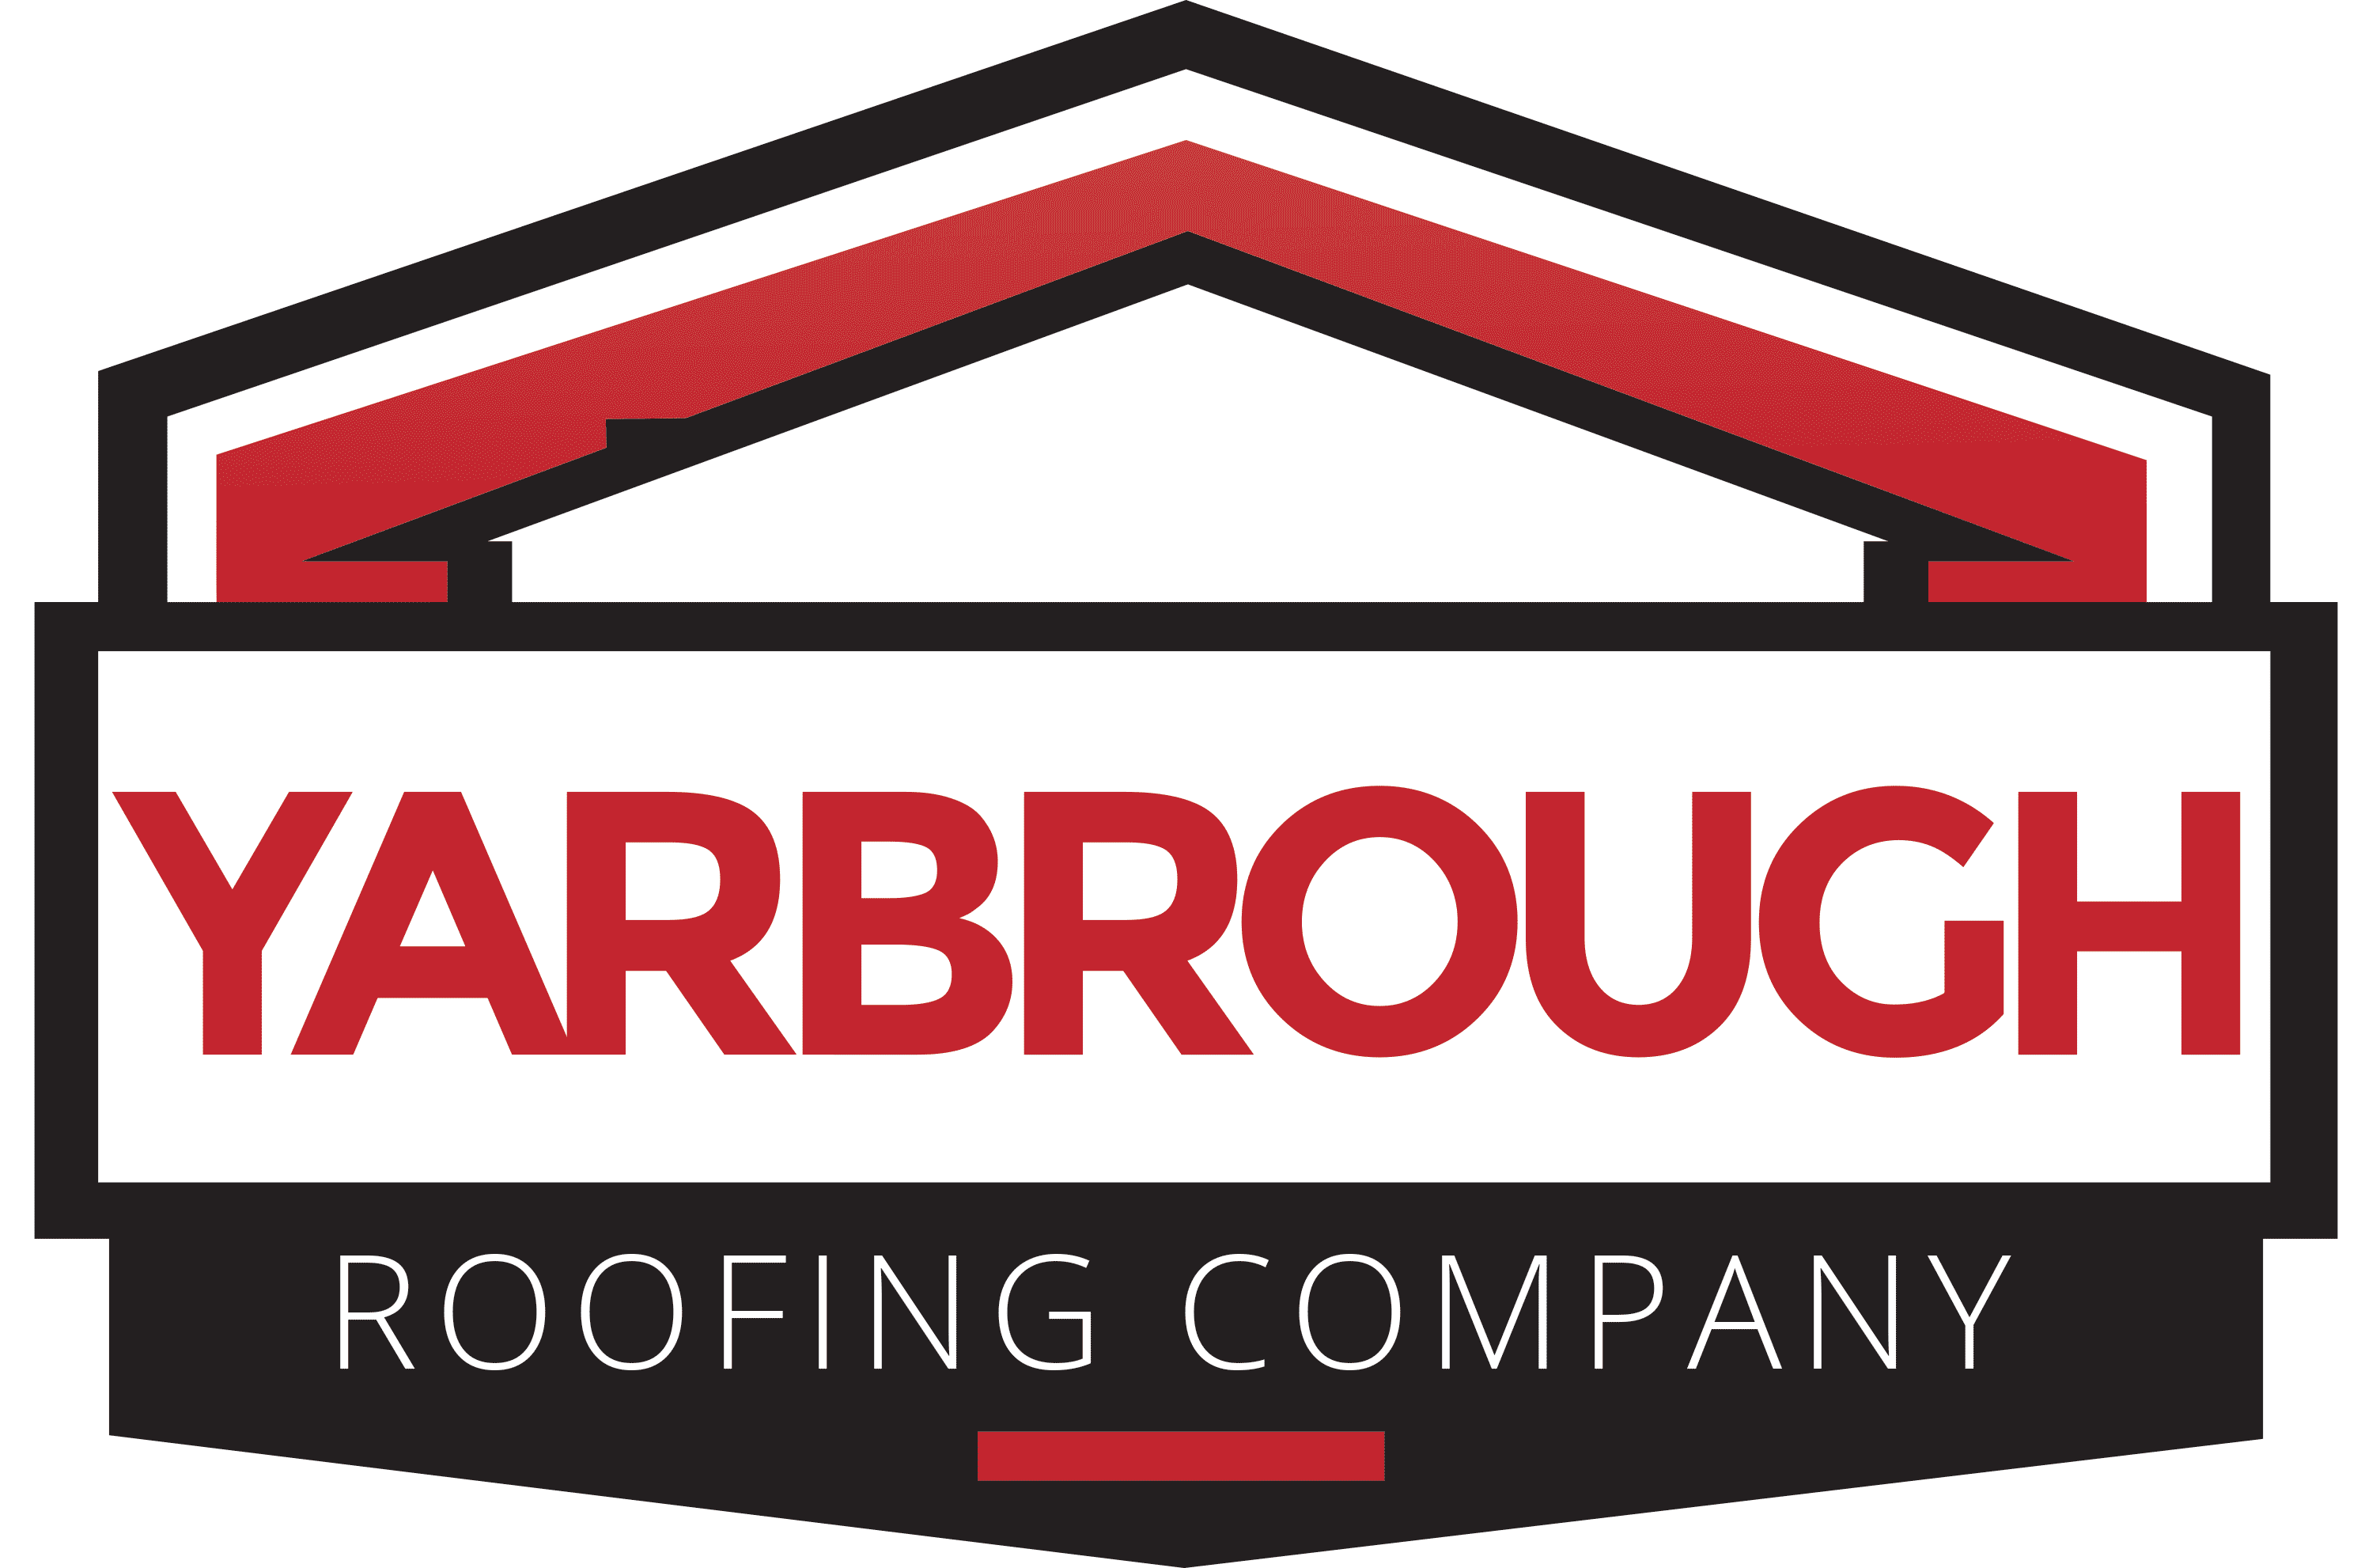 Yarbrough Roofing Company